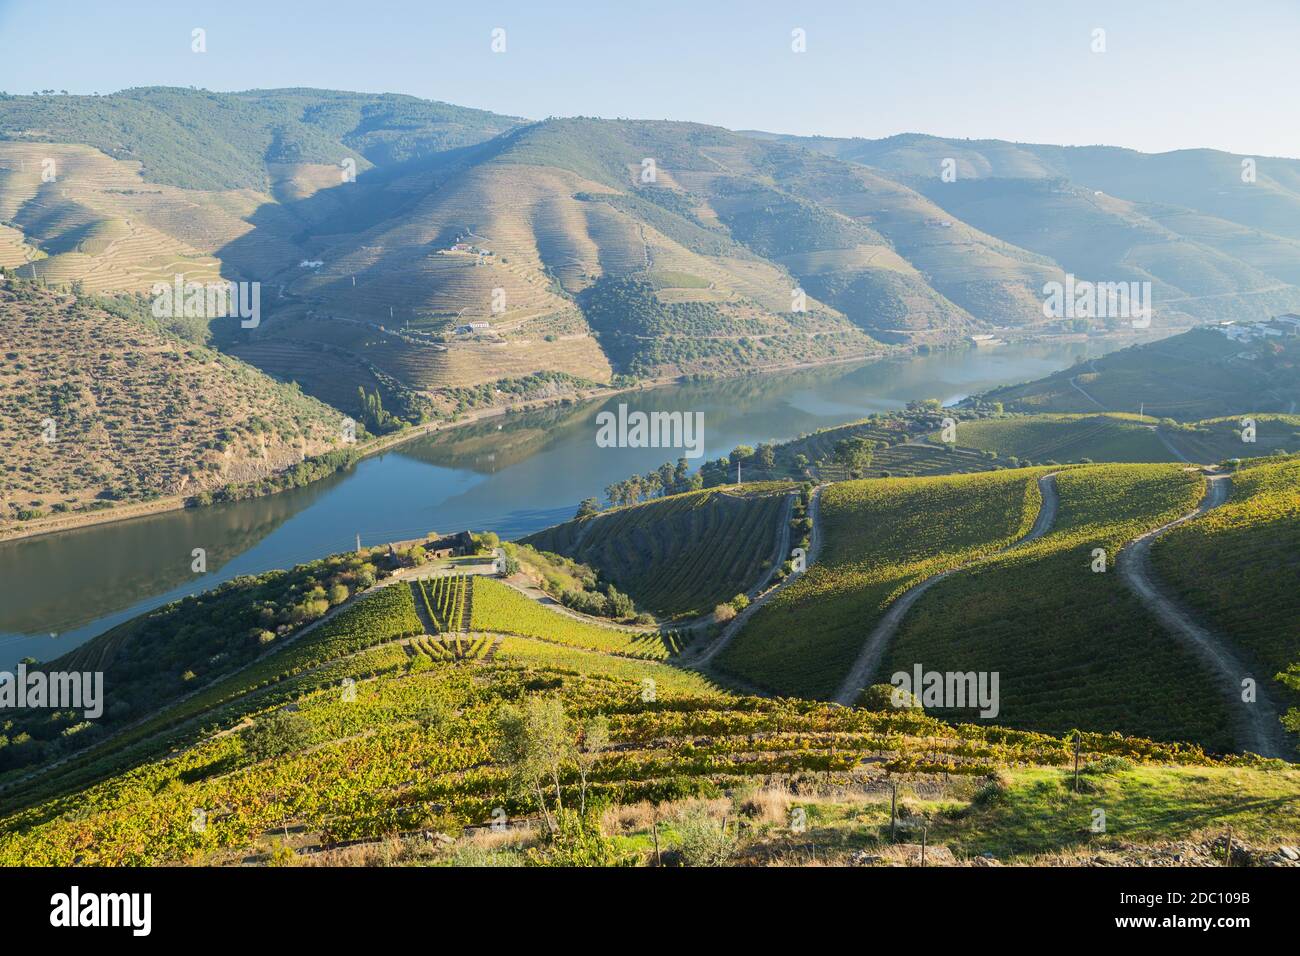 Scenic view of the Douro Valley and river with terraced vineyards near the village of Tua, Portugal Stock Photo